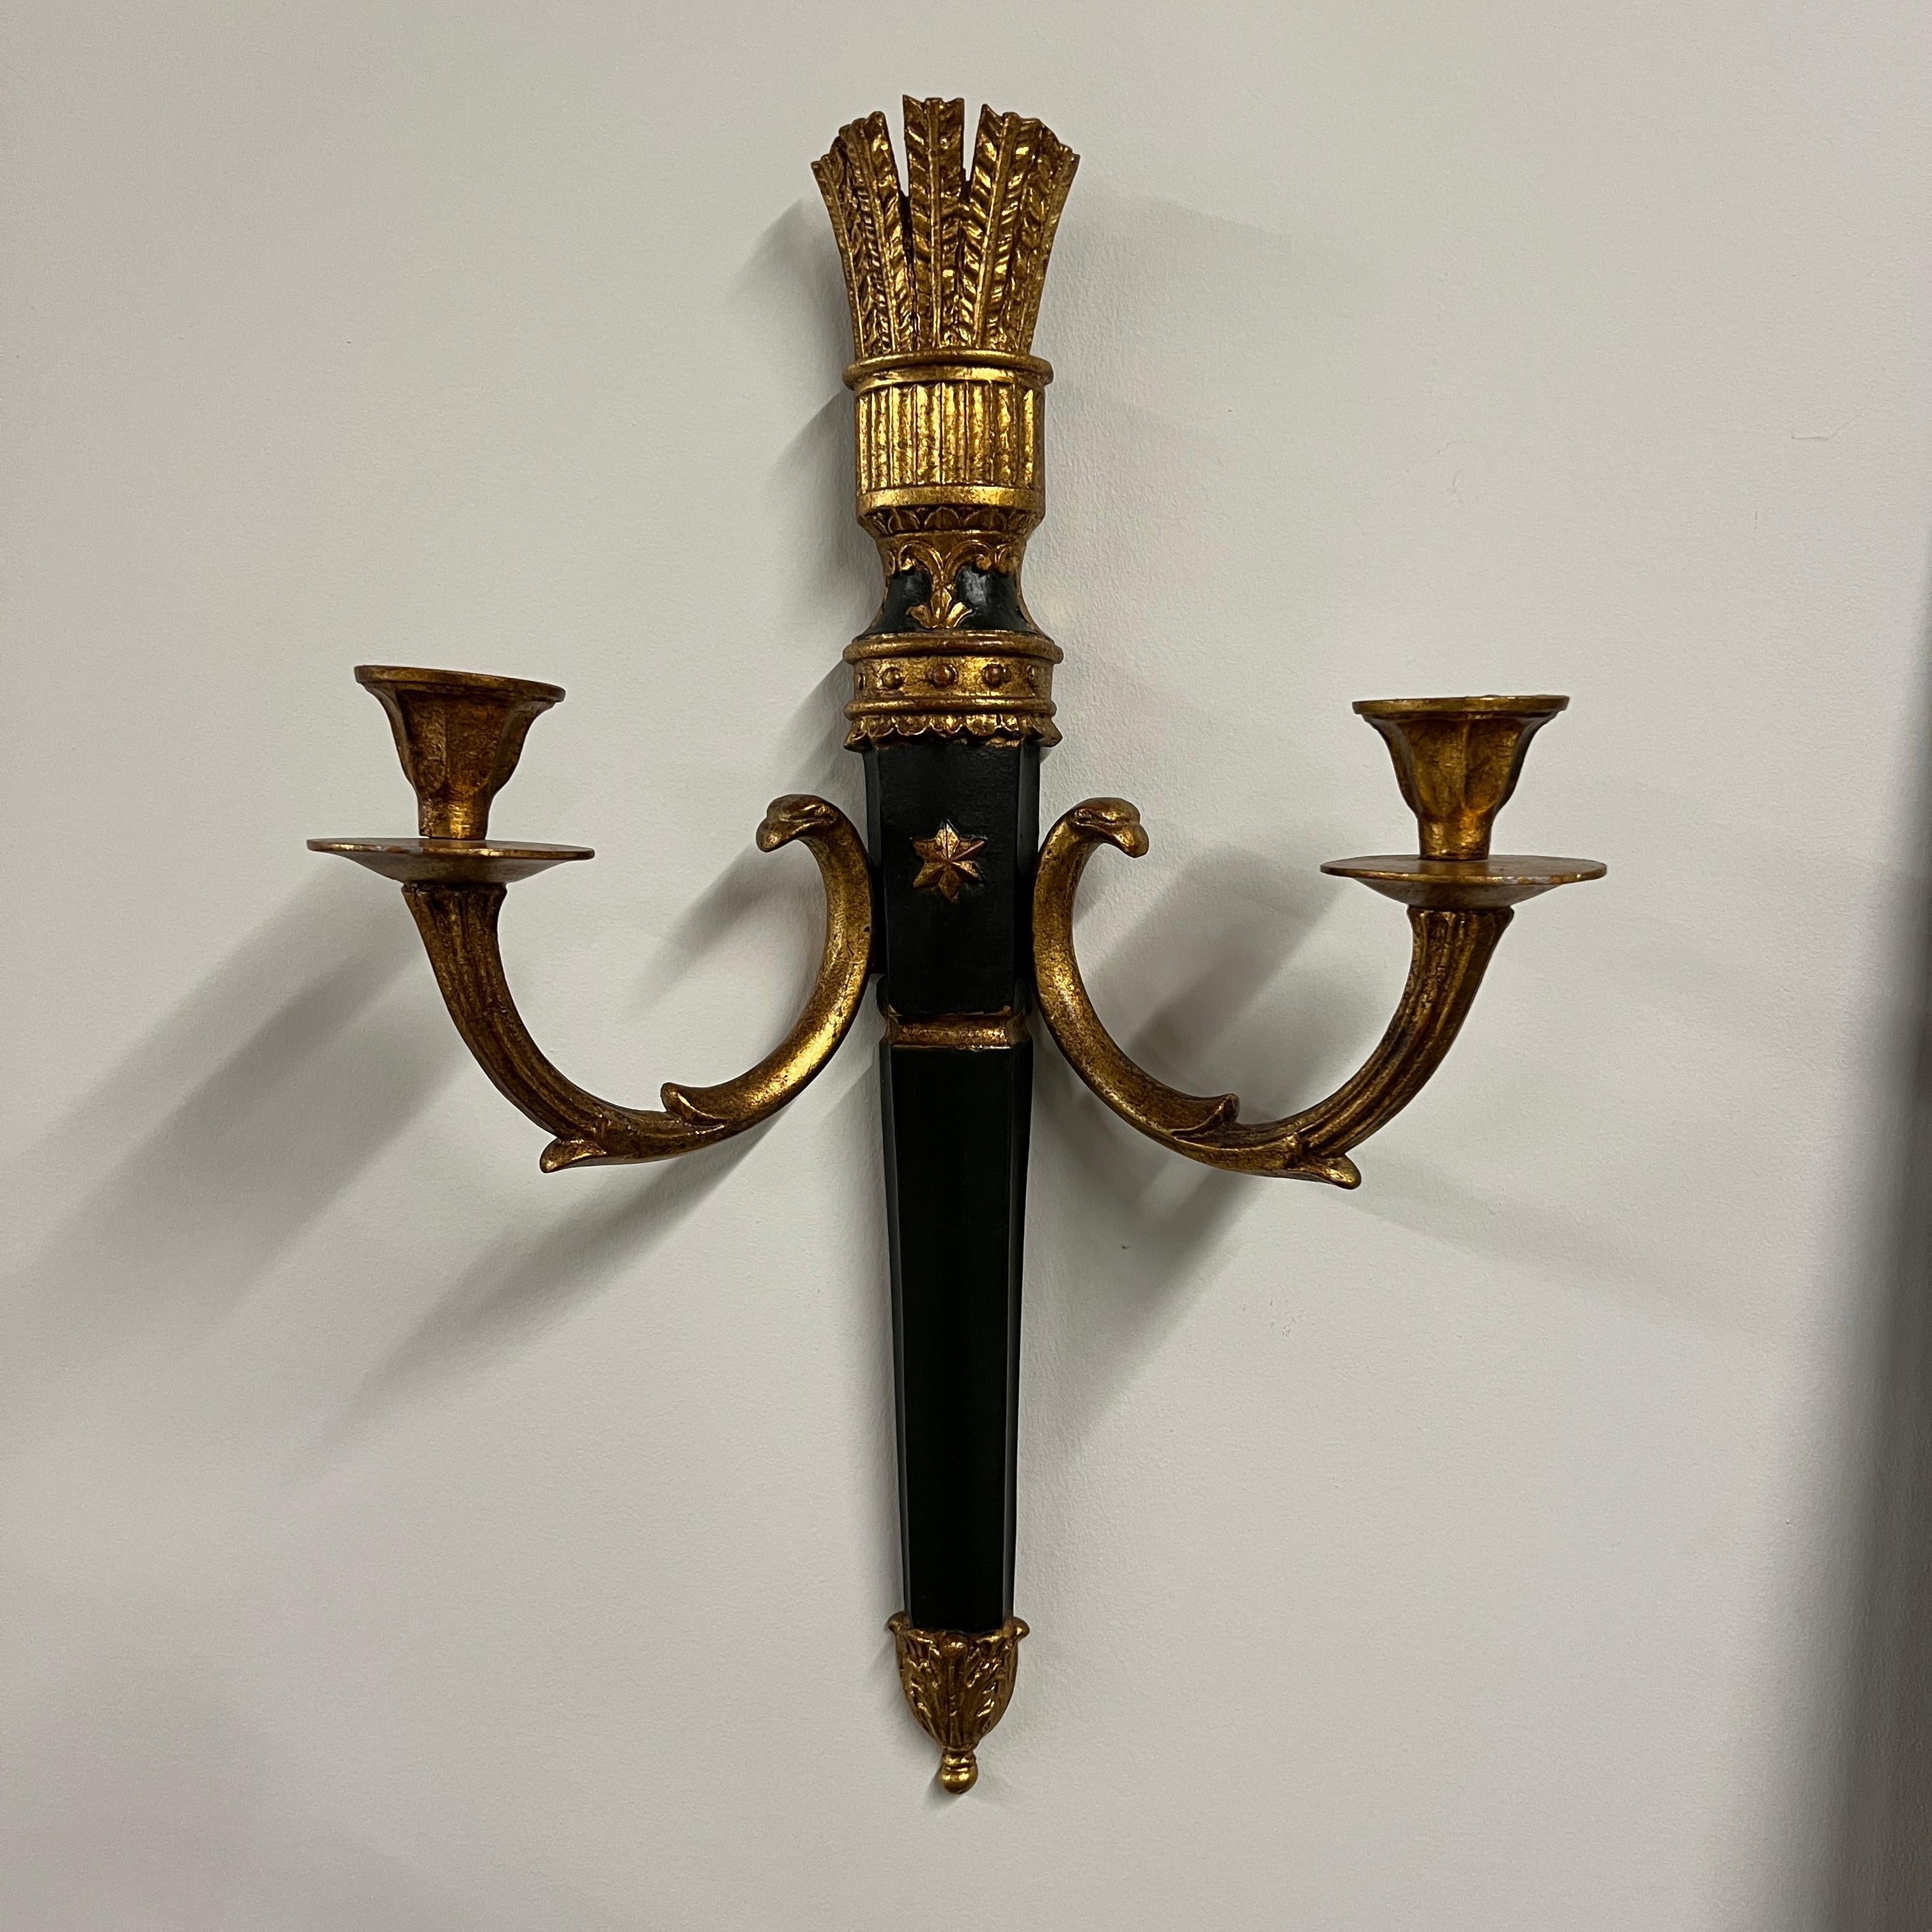 A pair of elegant Italian wall sconces (for use with candles) that feature an ebonized center and parcel-gilt stem supporting two gilt metal candle arms adorned with detail in the style of Louis XVI. Each center body is accented with a raised gold